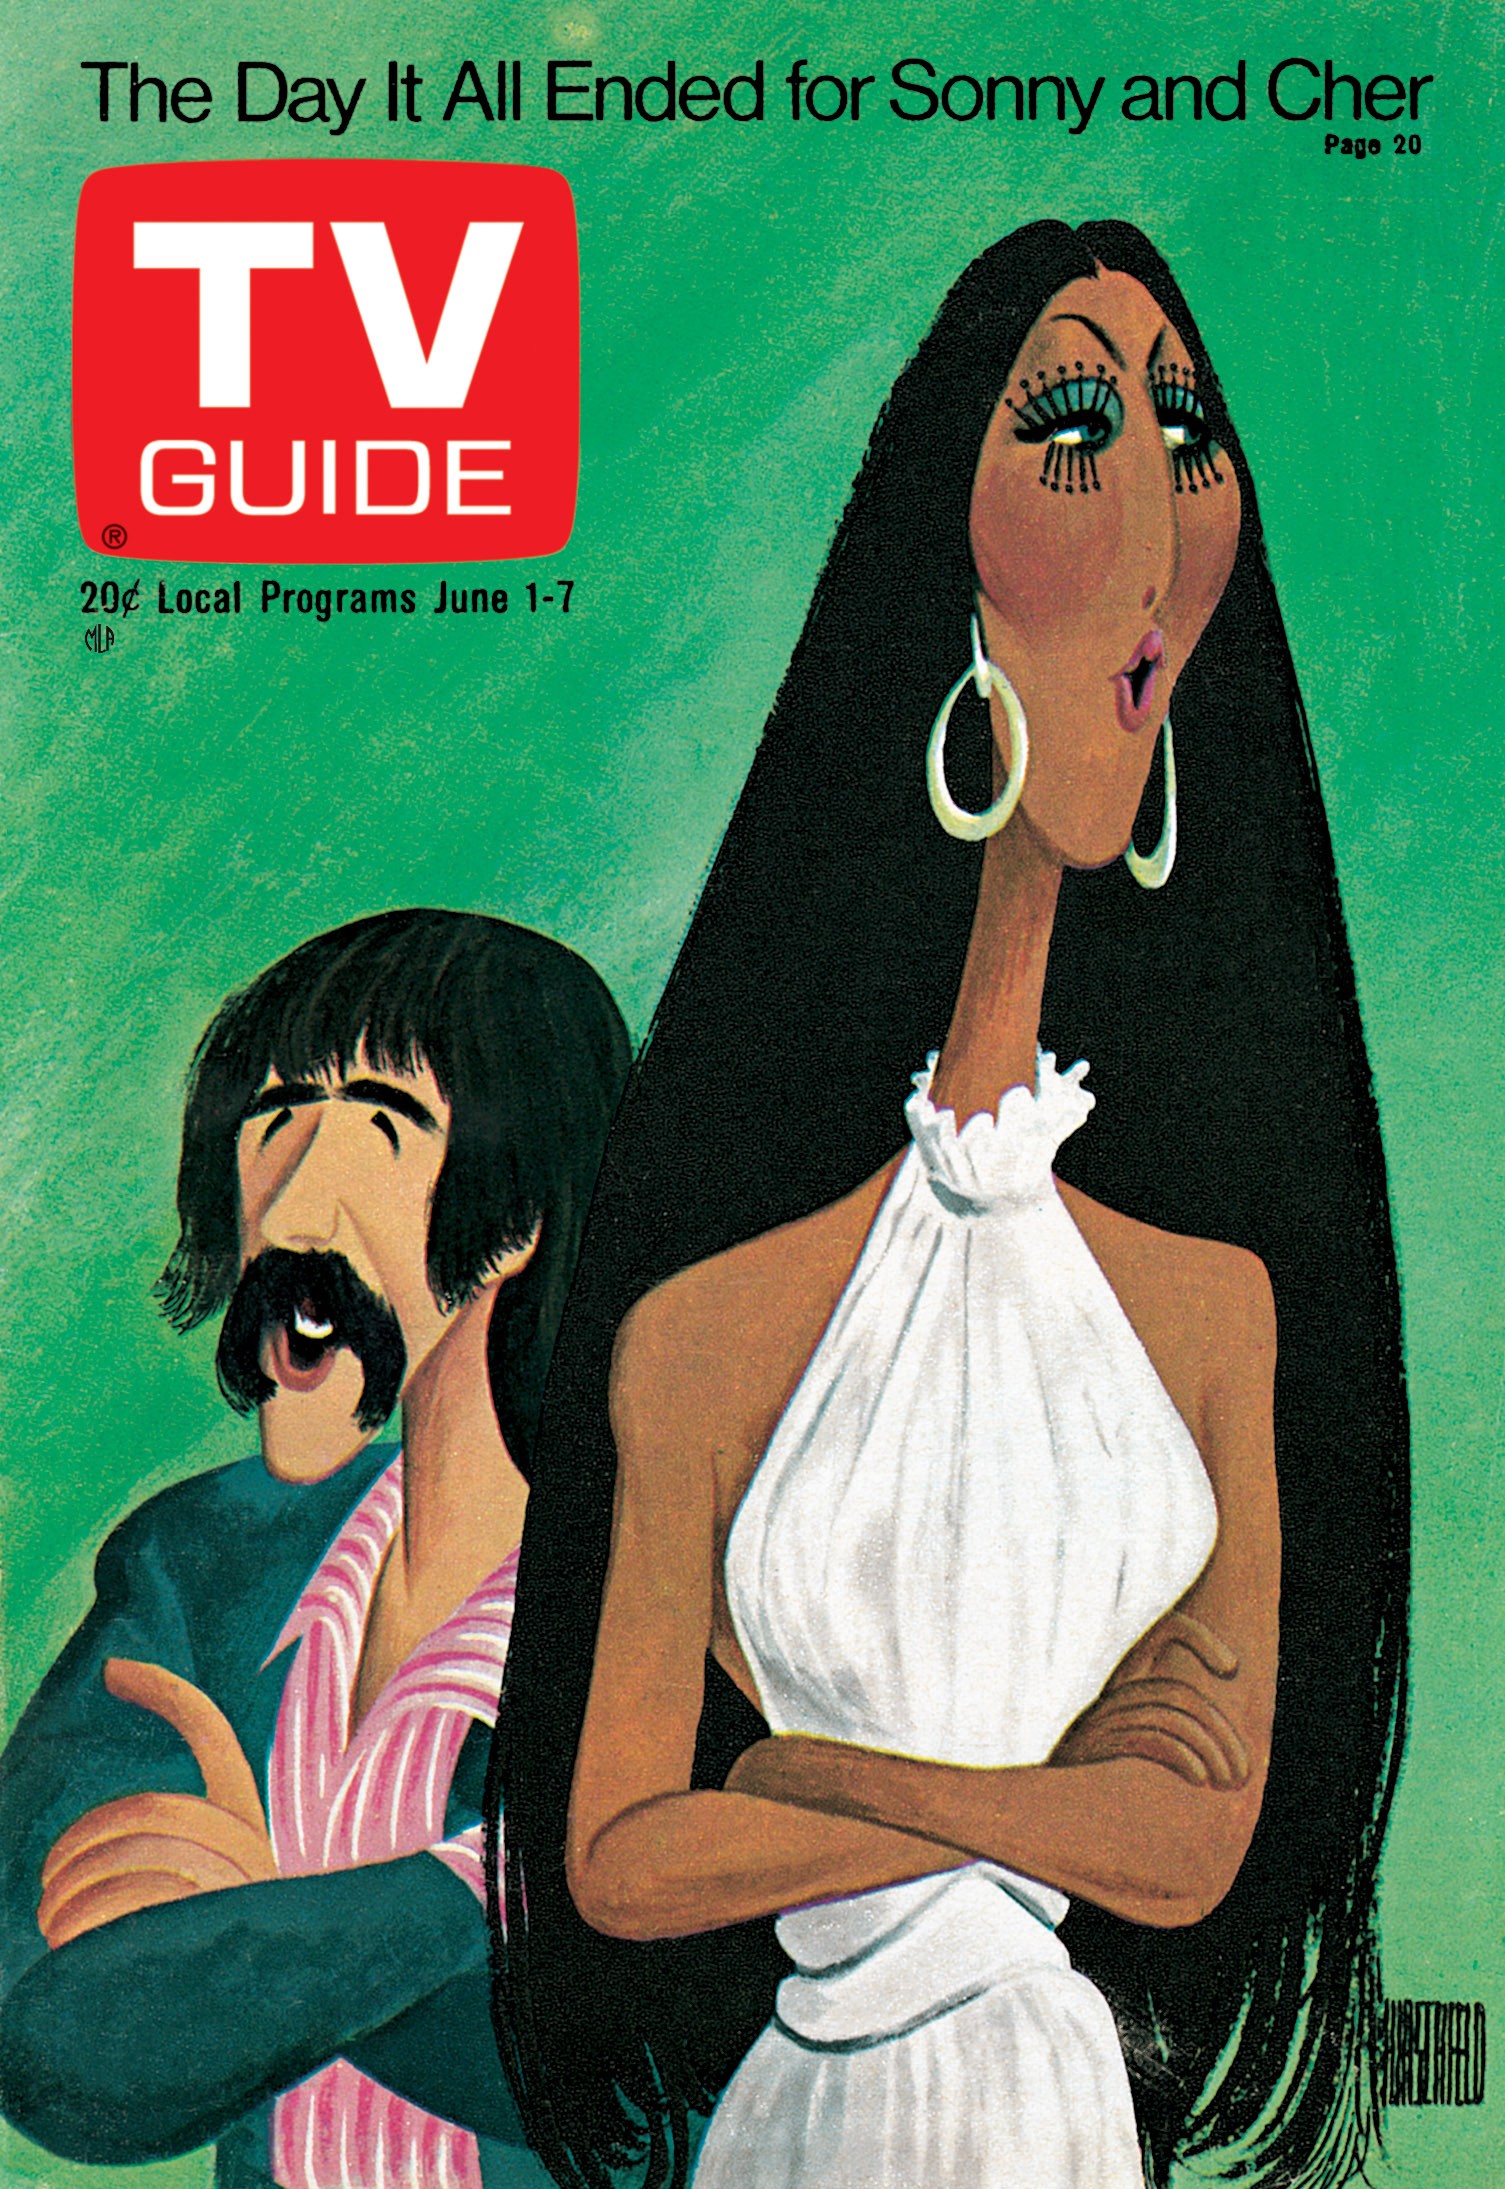 THE SONNY AND CHER SHOW, Sonny and Cher, TV GUIDE cover, June 1-7, 1974. 